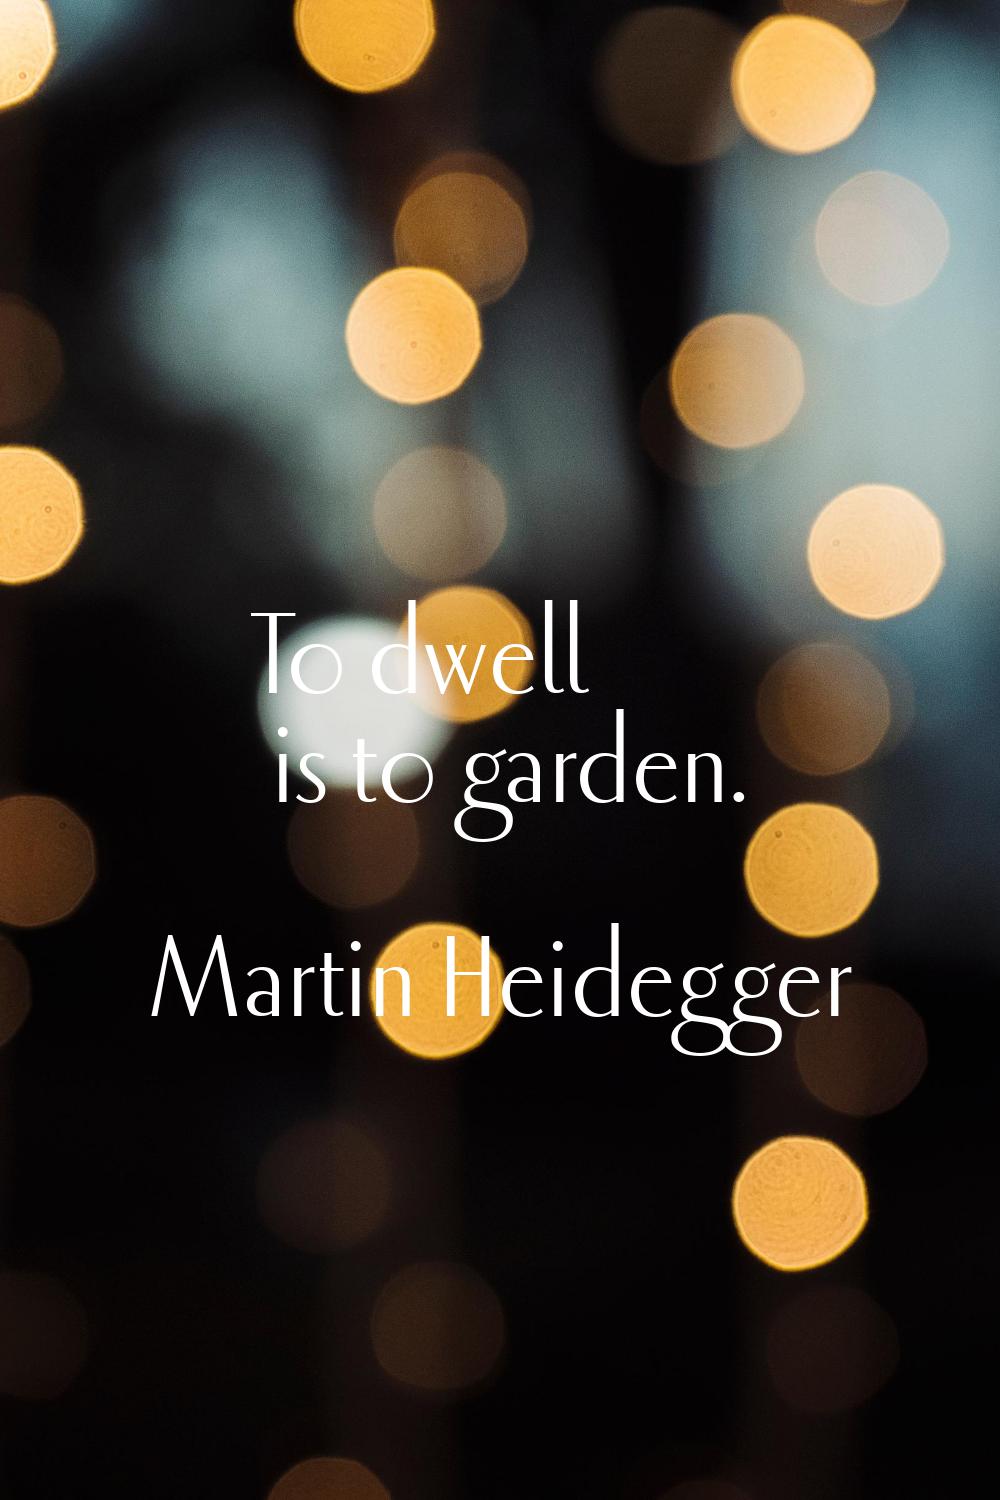 To dwell is to garden.